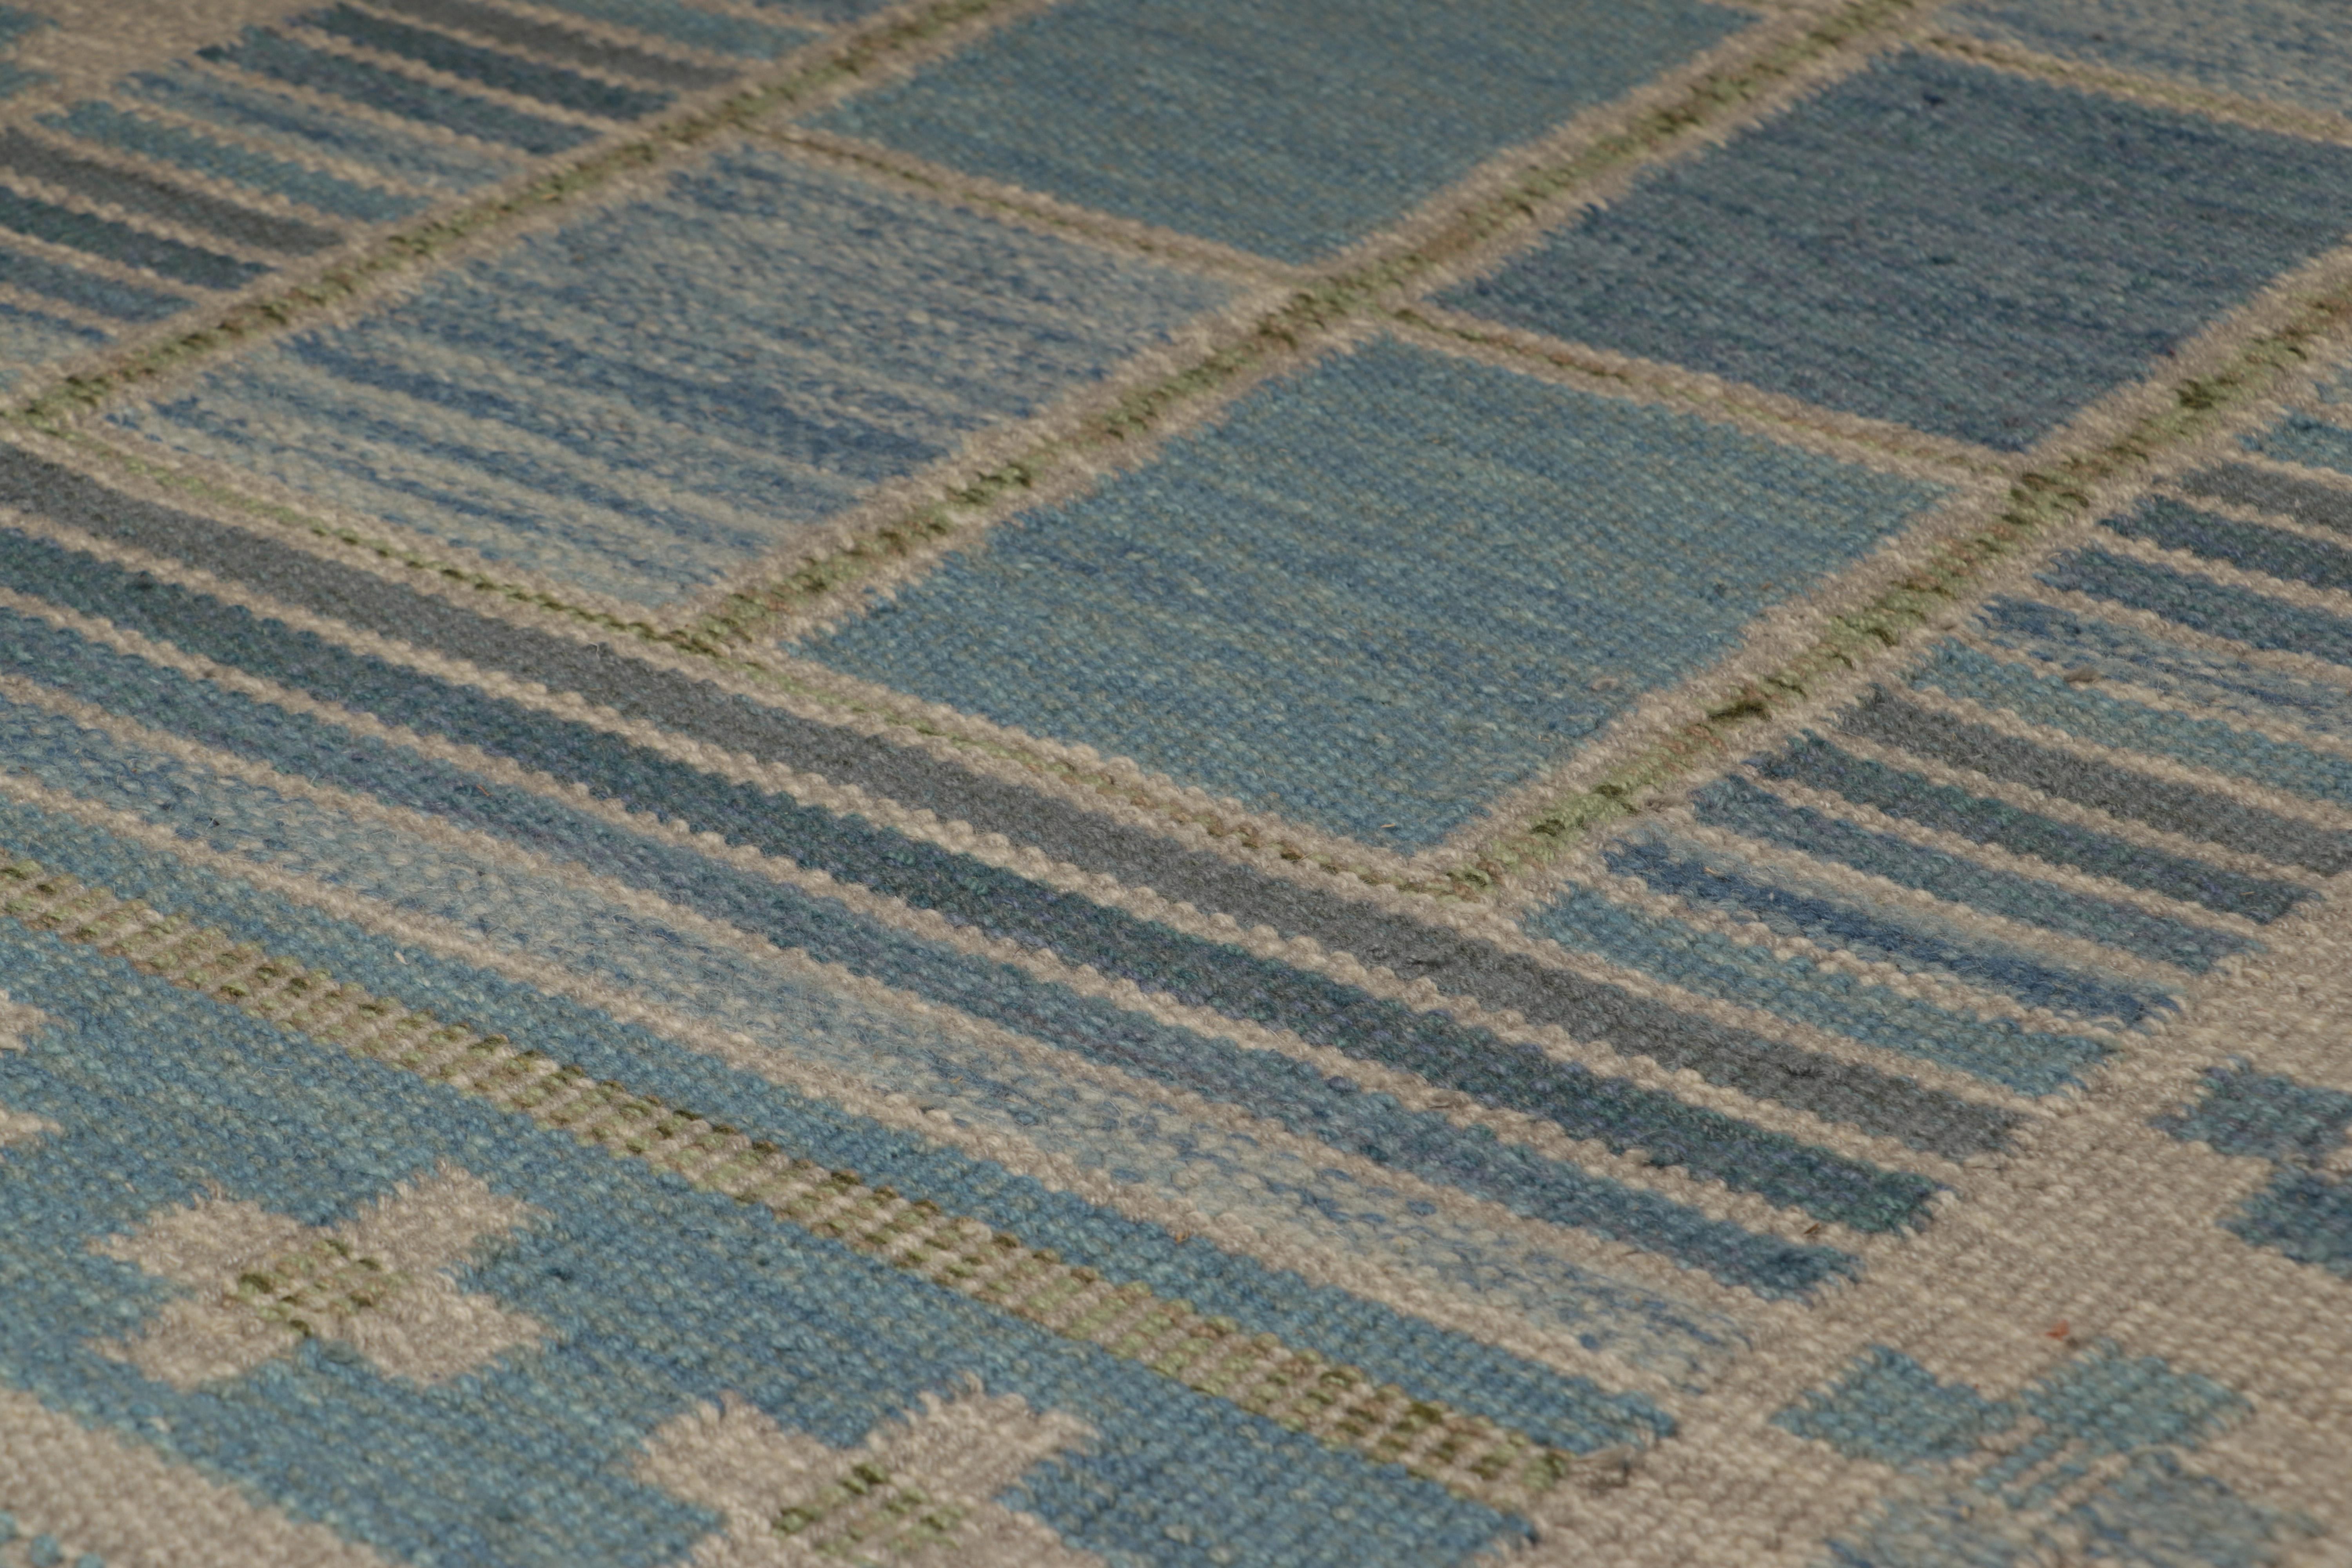 From an exciting new collection of gift-size pieces, this 3x5 Swedish-style rug is a bold new addition to the Scandinavian Collection by Rug & Kilim. Handwoven in a wool flatweave with undyed natural yarns as well, its design is inspired by Swedish